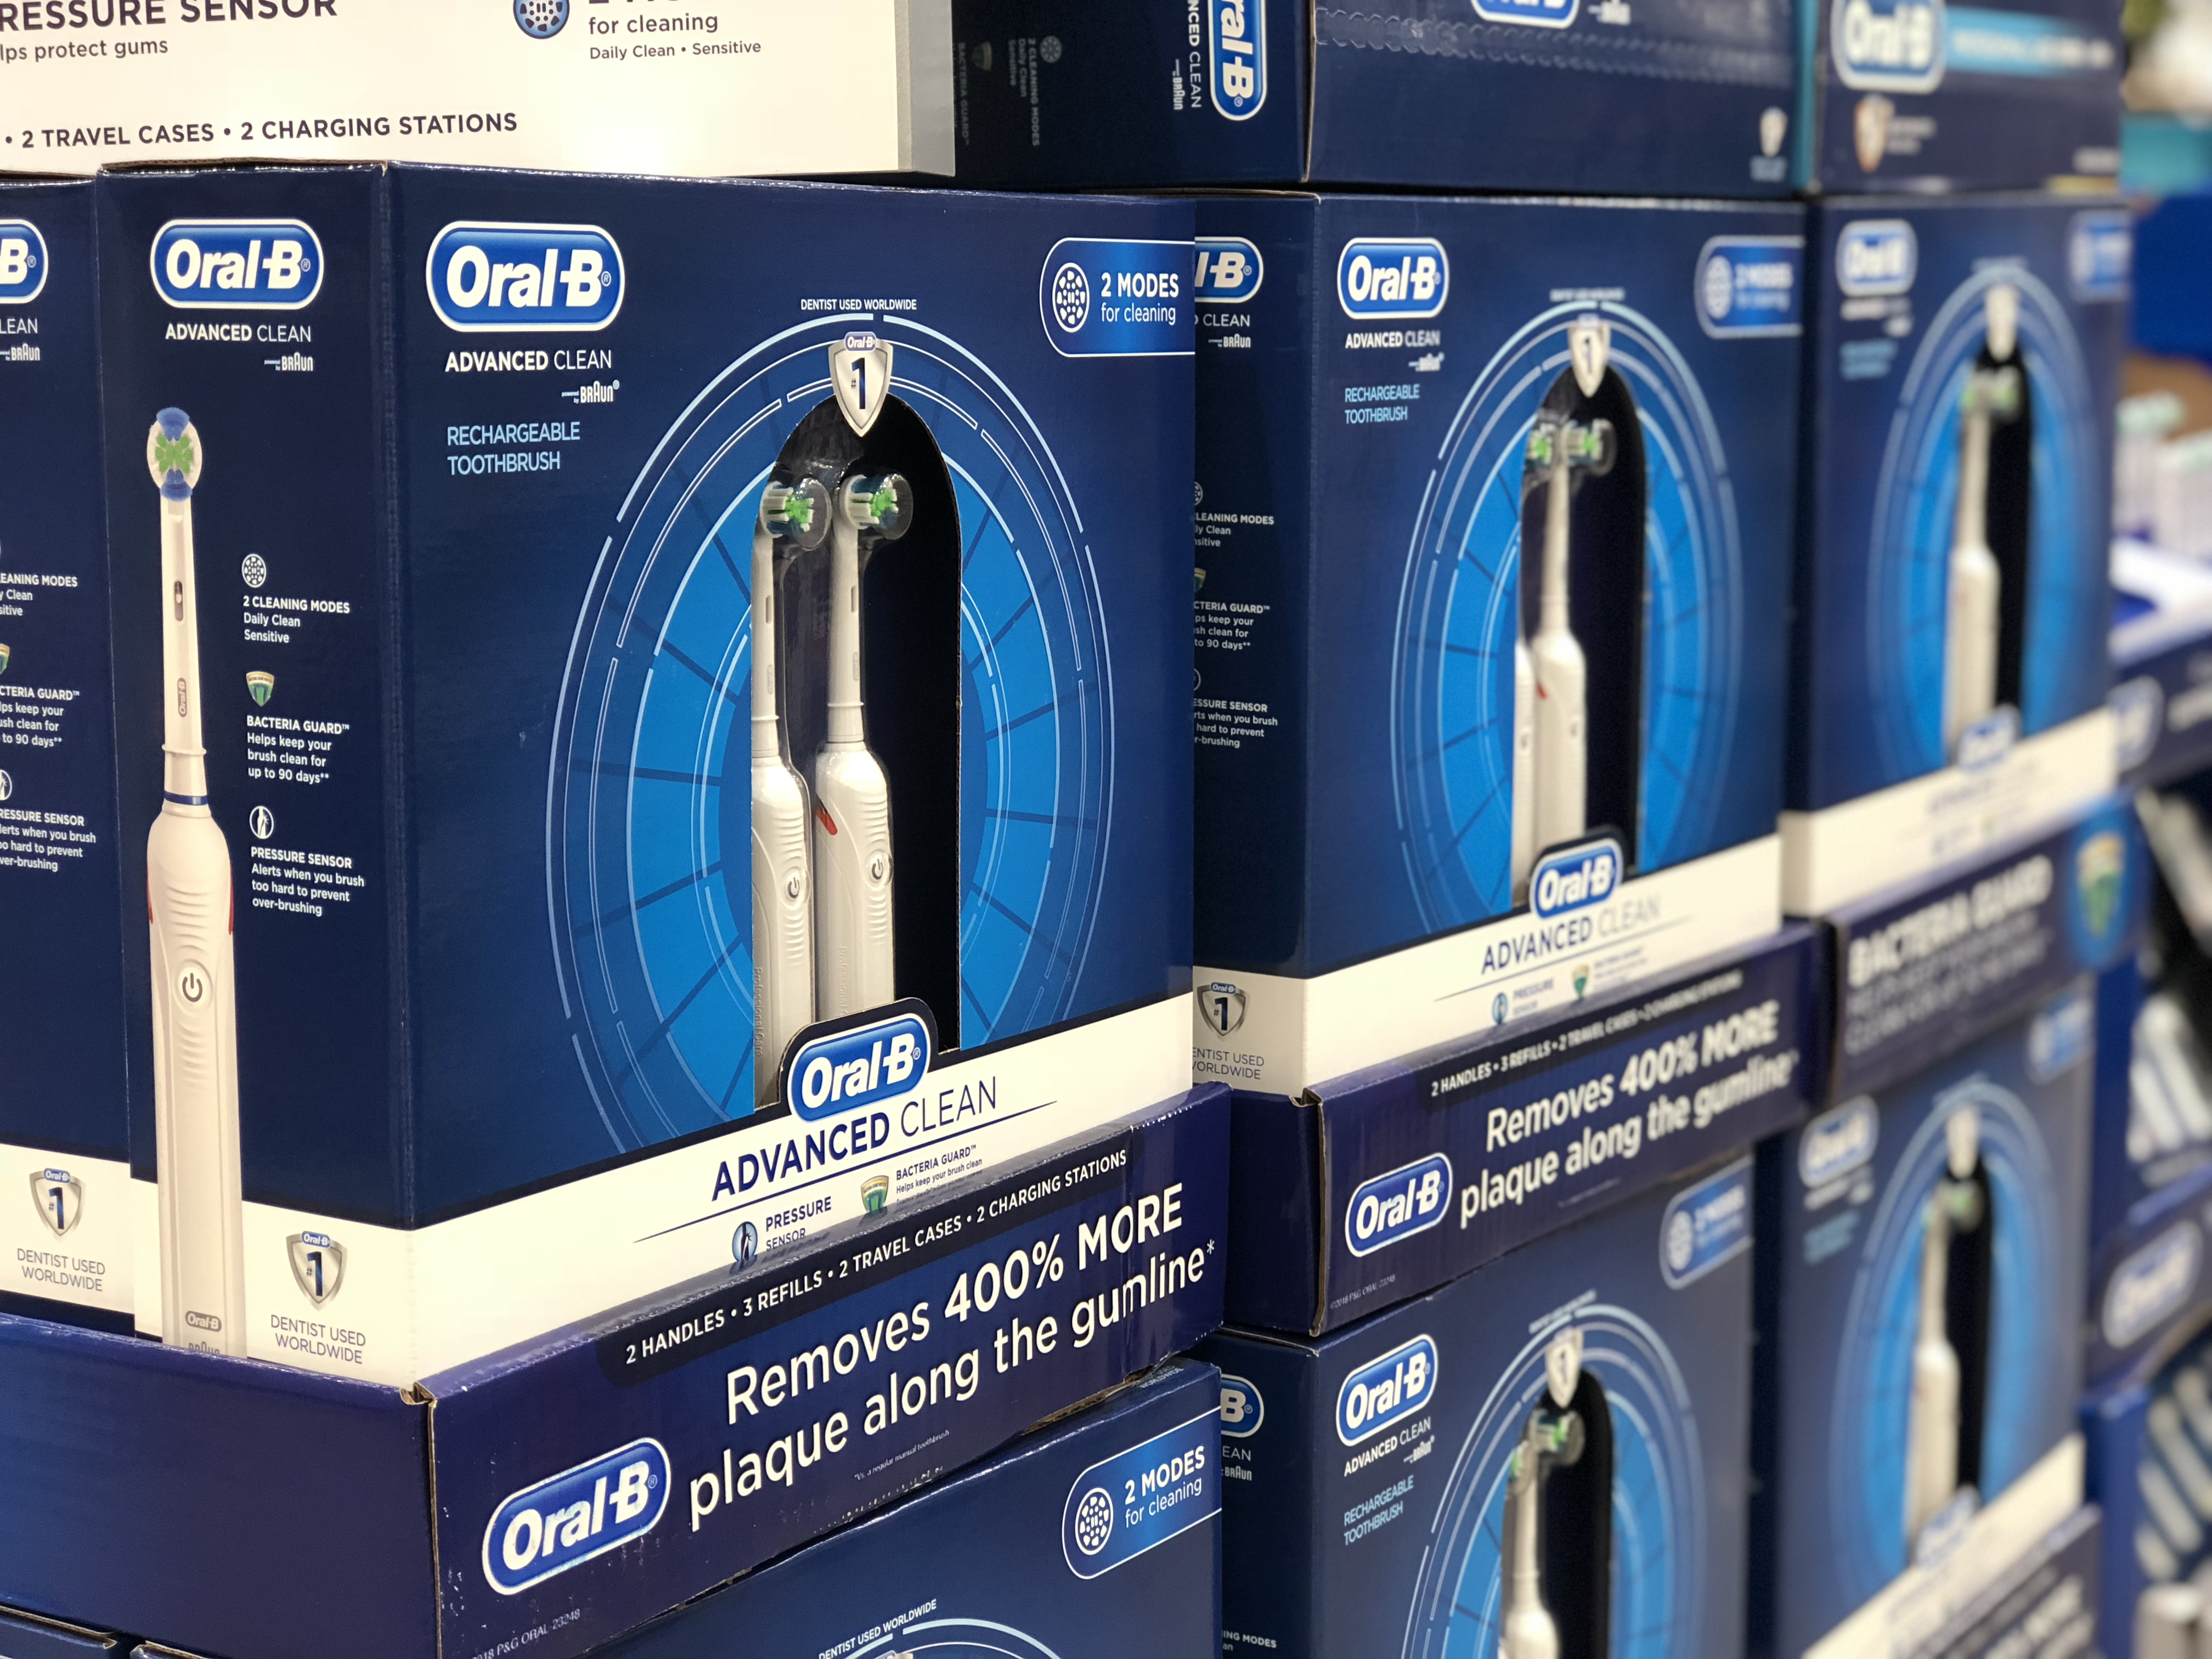 Oral-B 2pack toothbrushes set at Costco